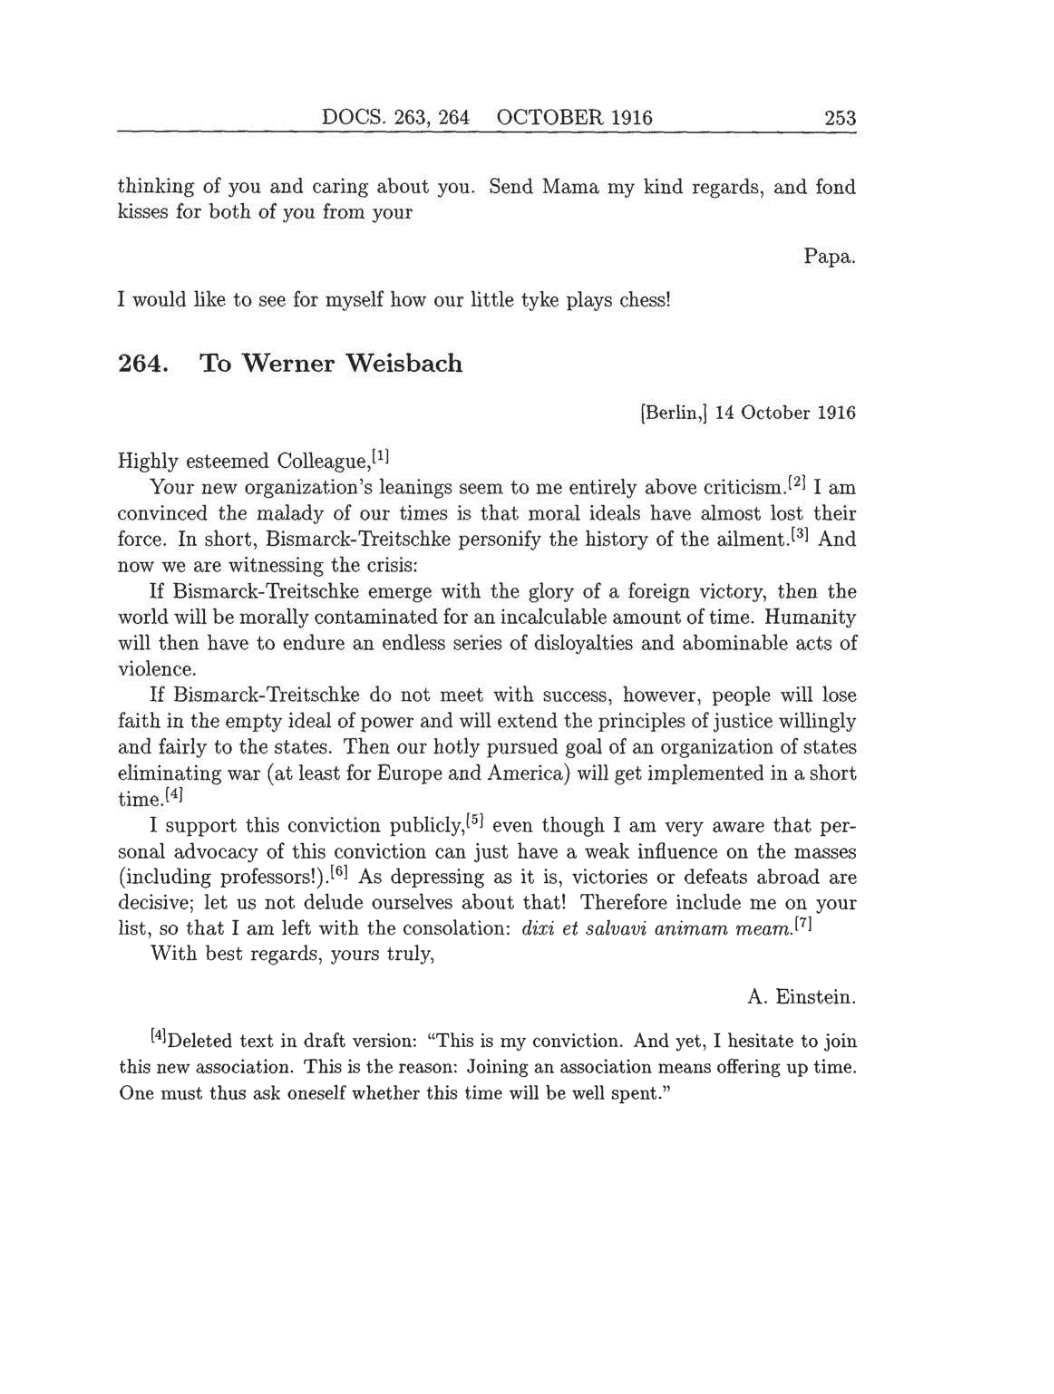 Volume 8: The Berlin Years: Correspondence, 1914-1918 (English translation supplement) page 253